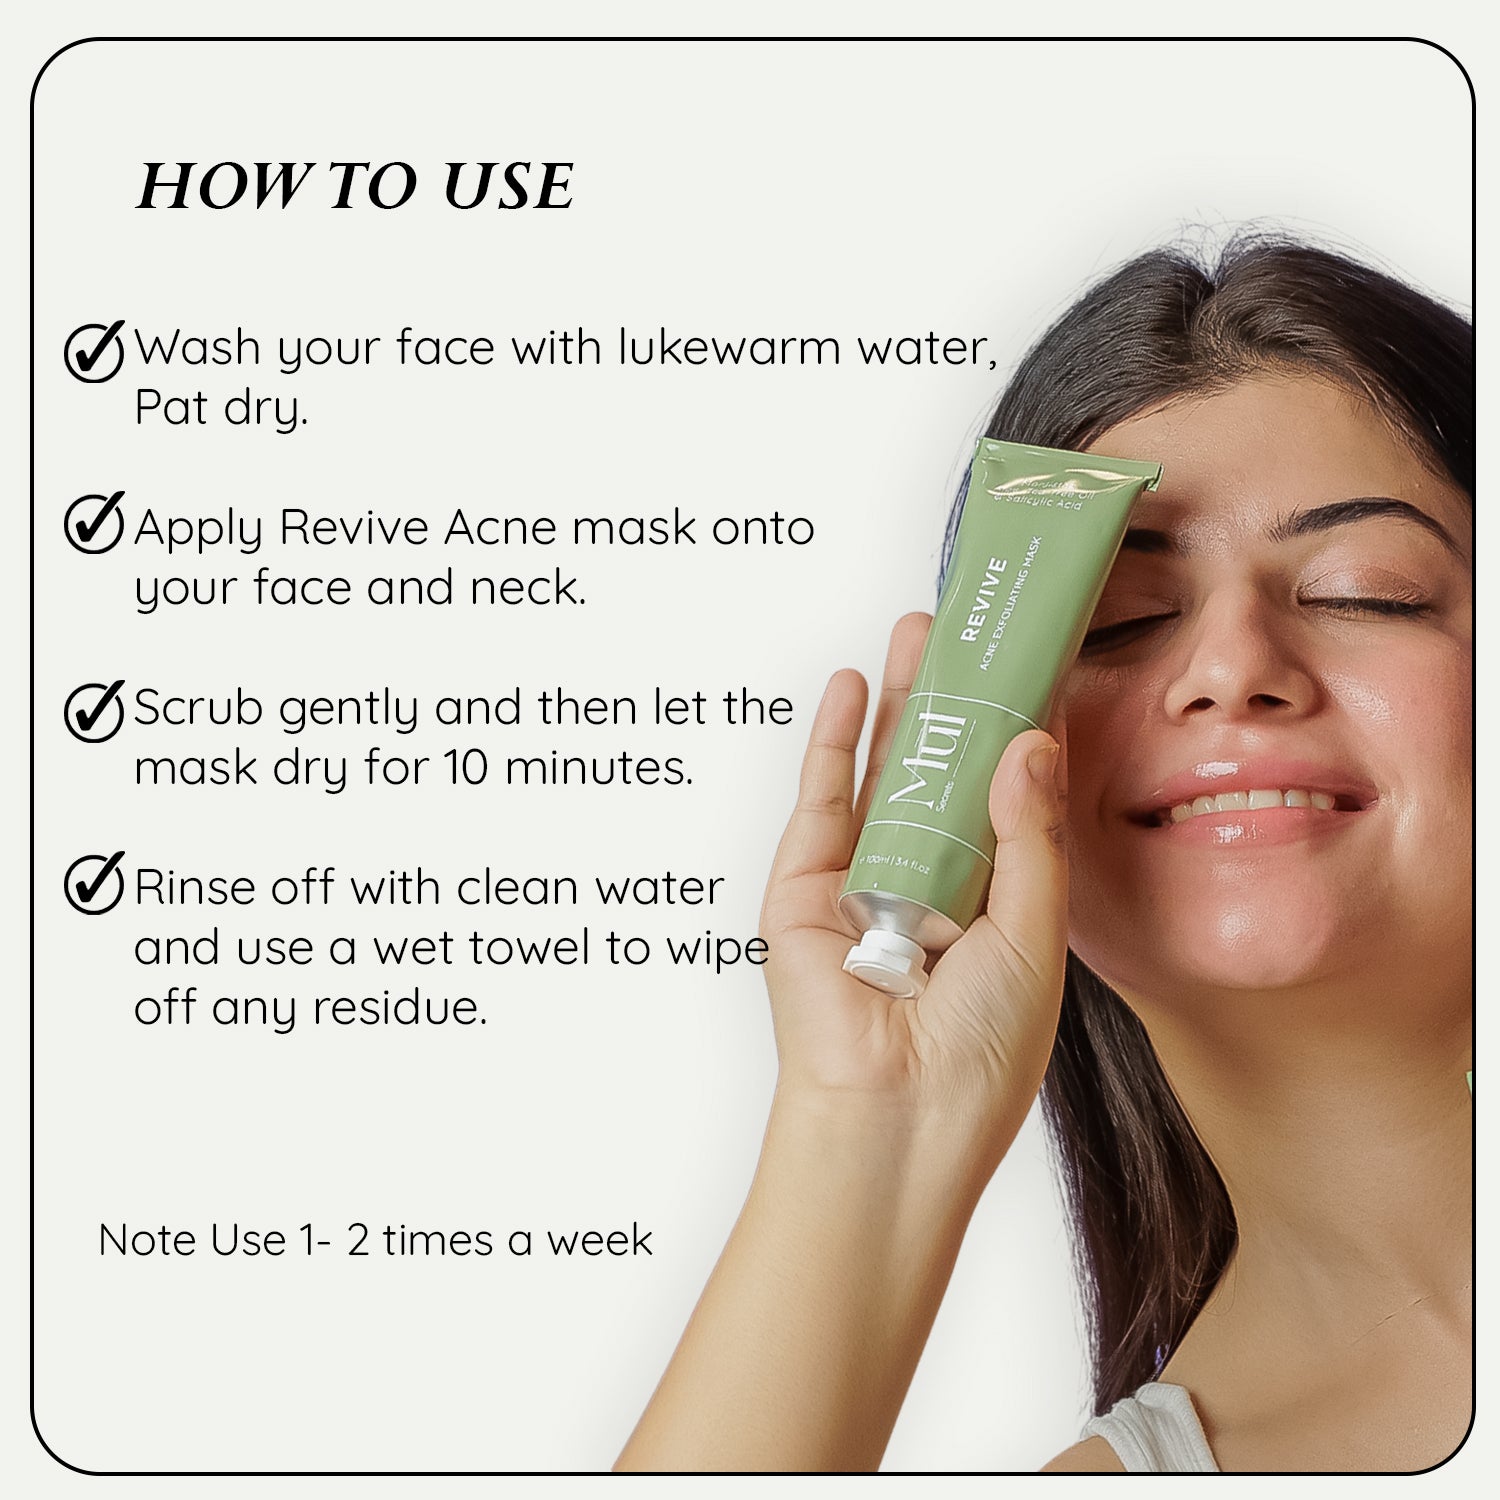 how to use acne reviive facemask by mul secrets